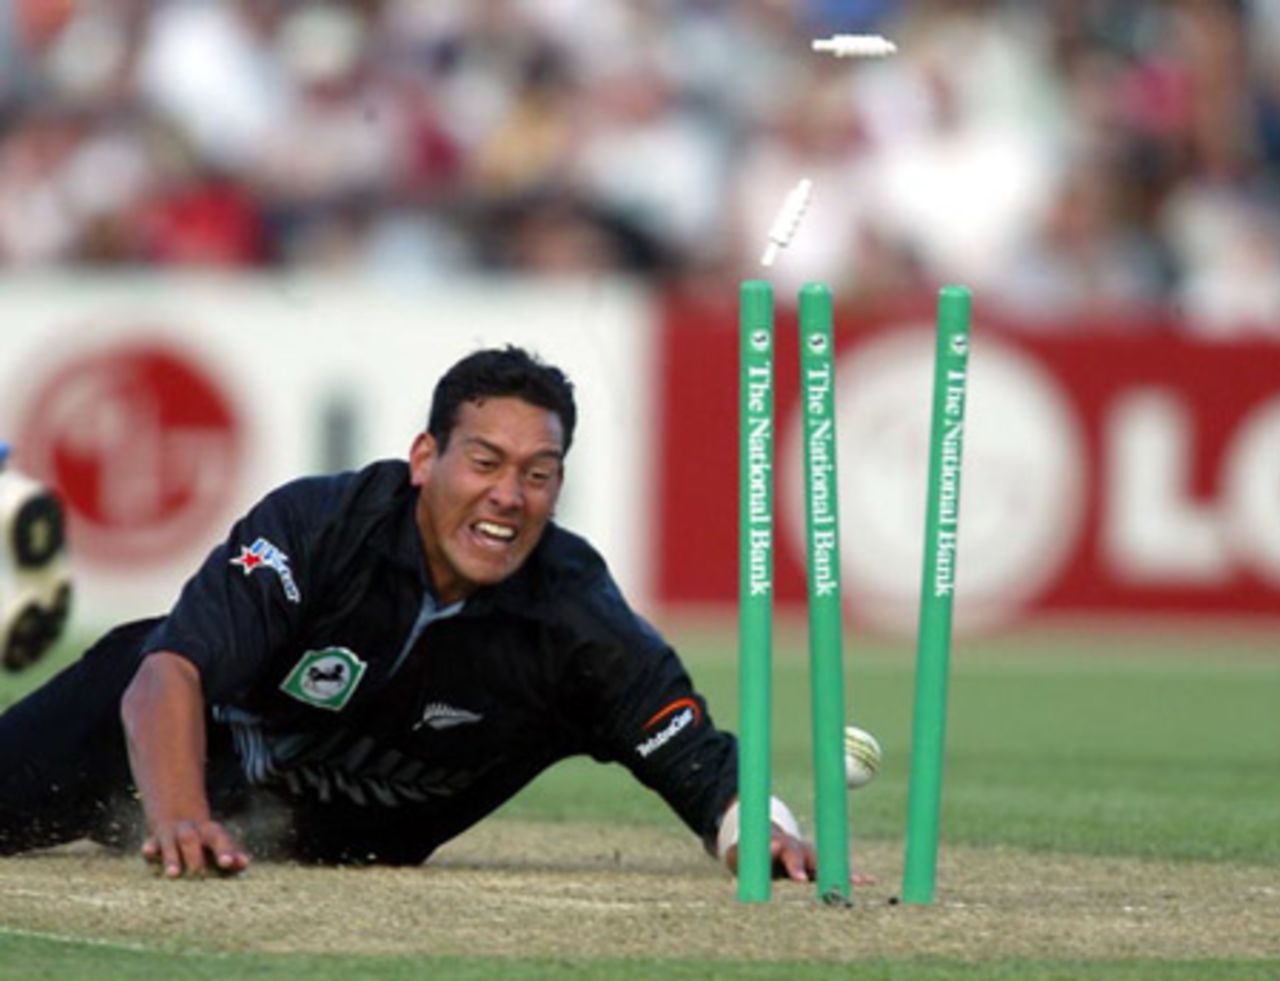 New Zealand fielder Daryl Tuffey dives to run out Indian batsman Virender Sehwag for 108. 2nd ODI: New Zealand v India at McLean Park, Napier, 29 December 2002.